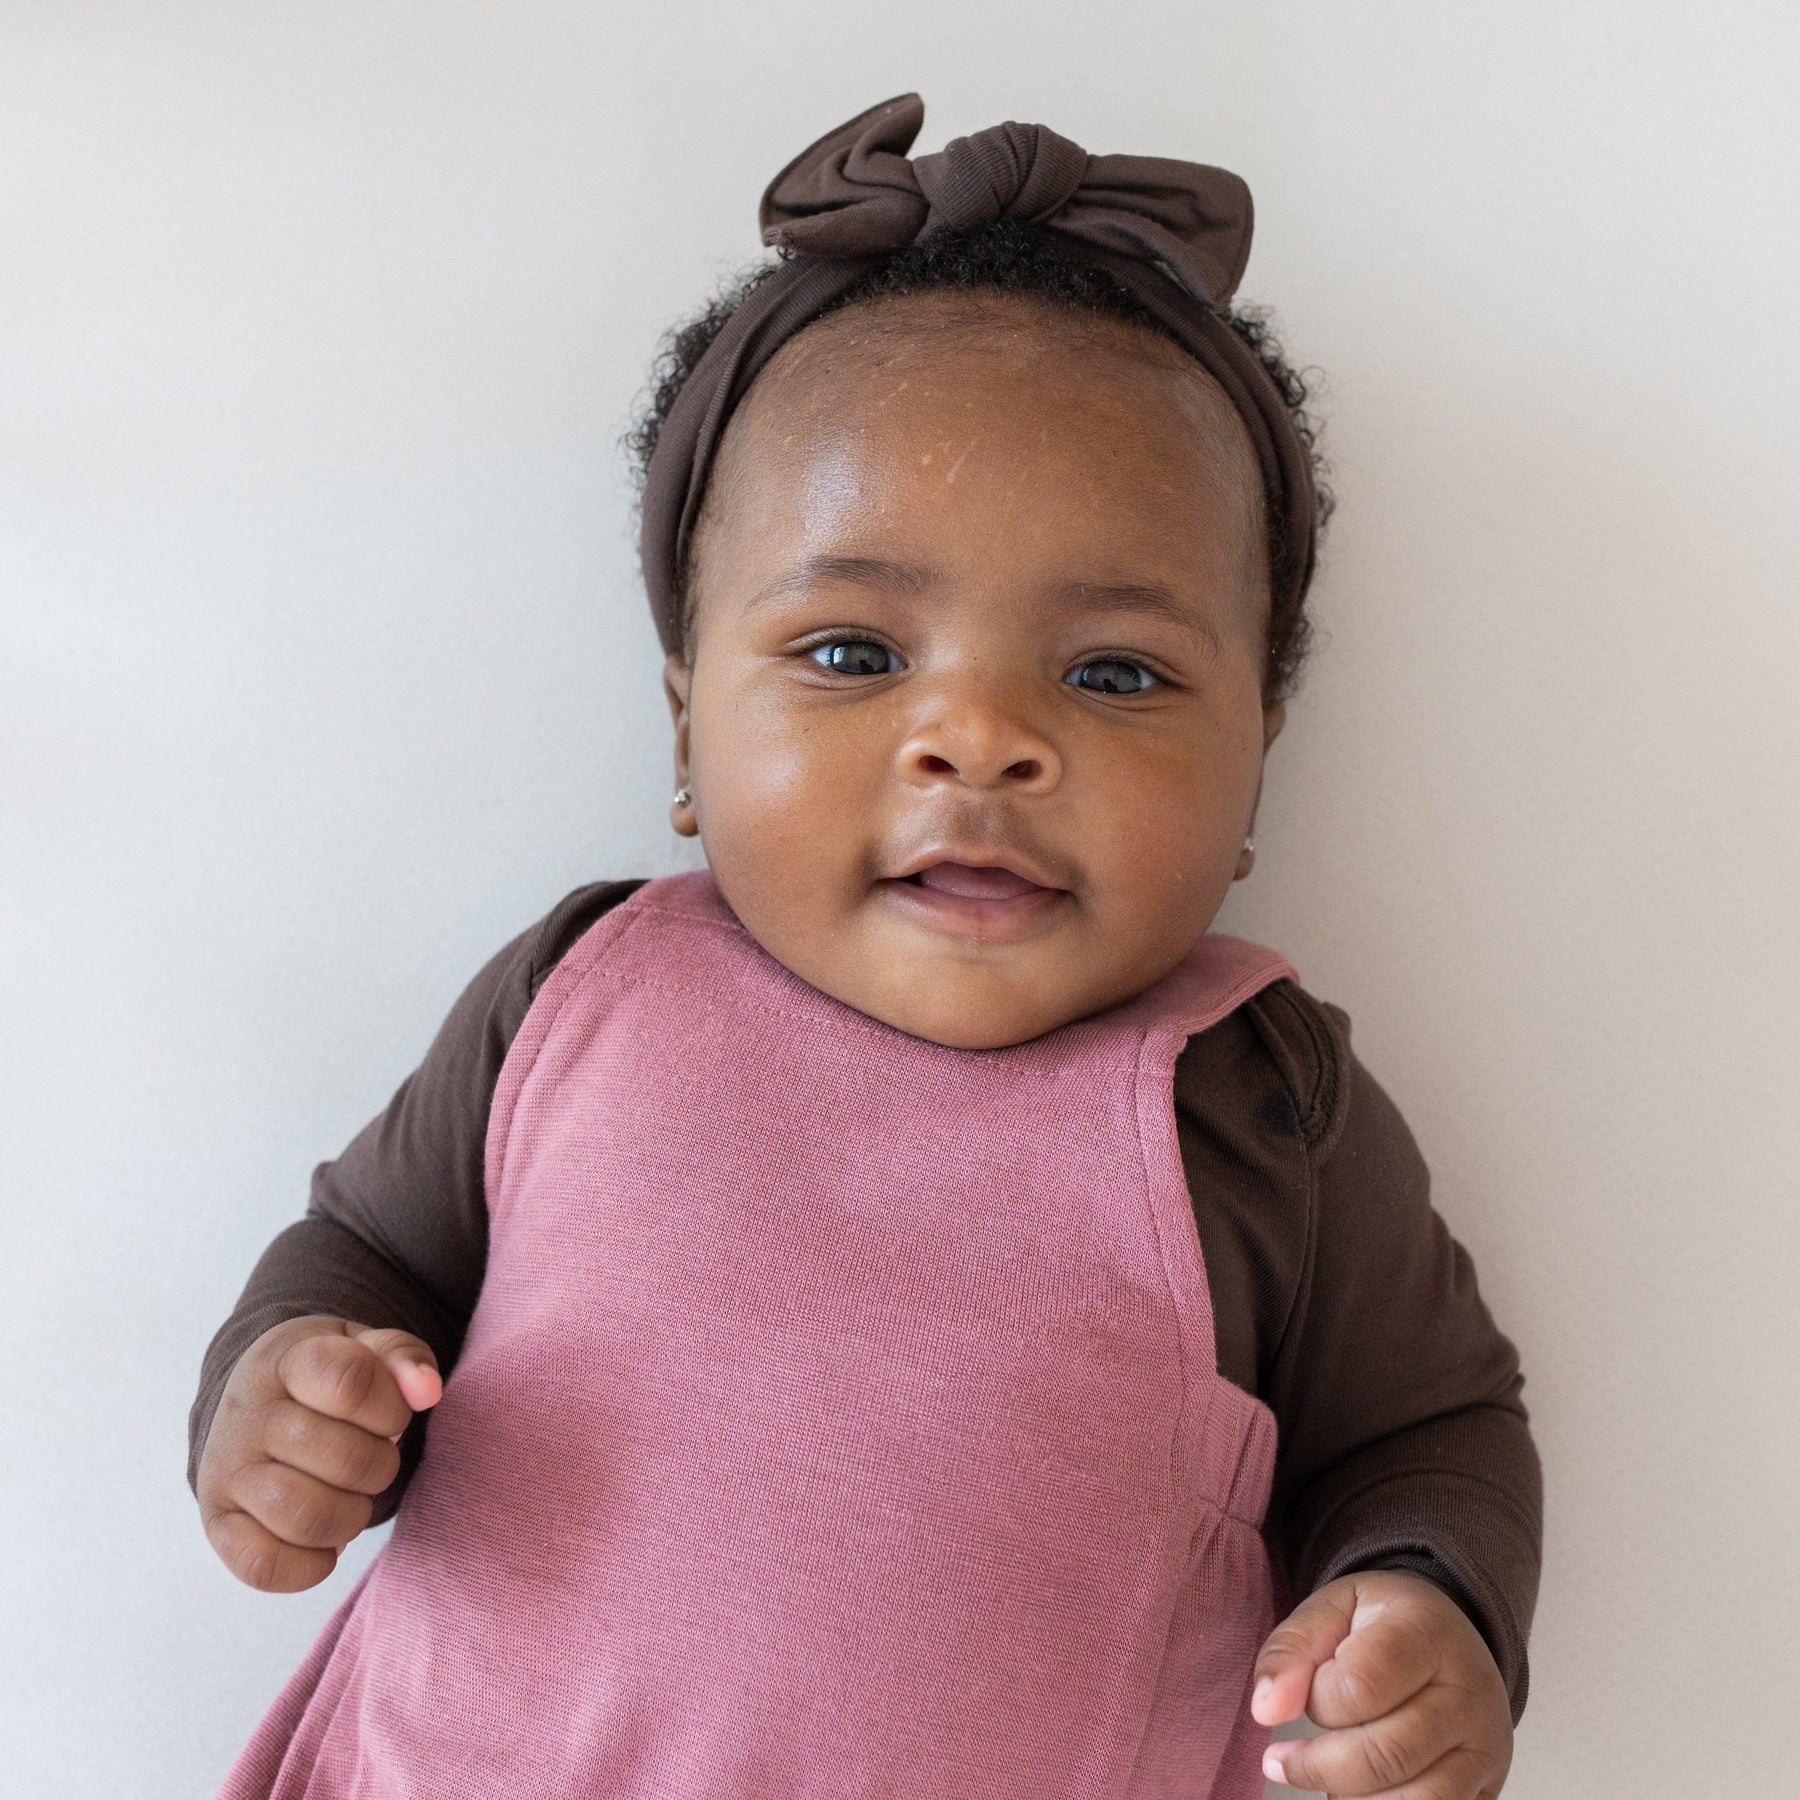 Kyte Baby Bubble Overall Bamboo Jersey Bubble Overall in Dusty Rose